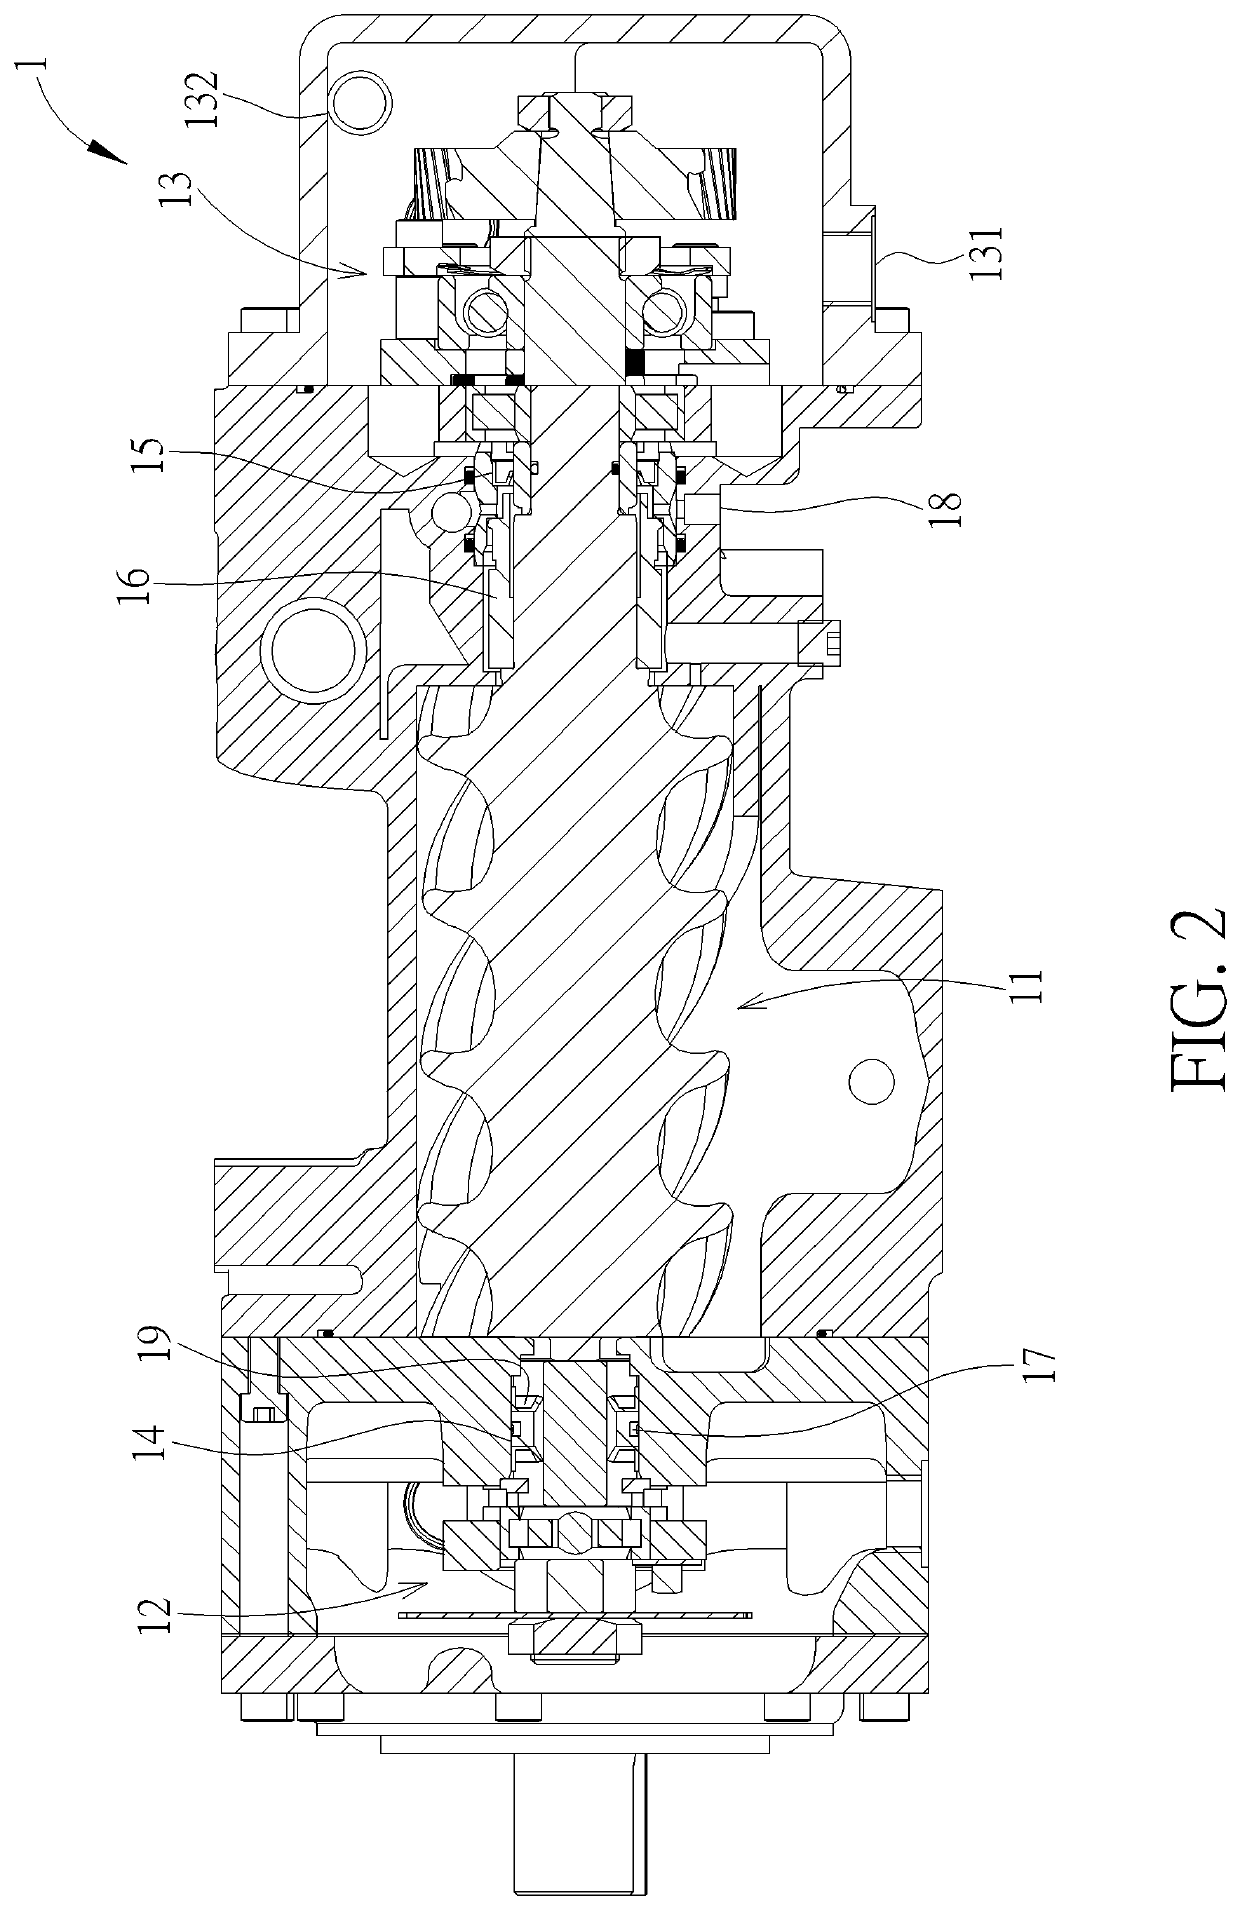 Water lubrication air compression system